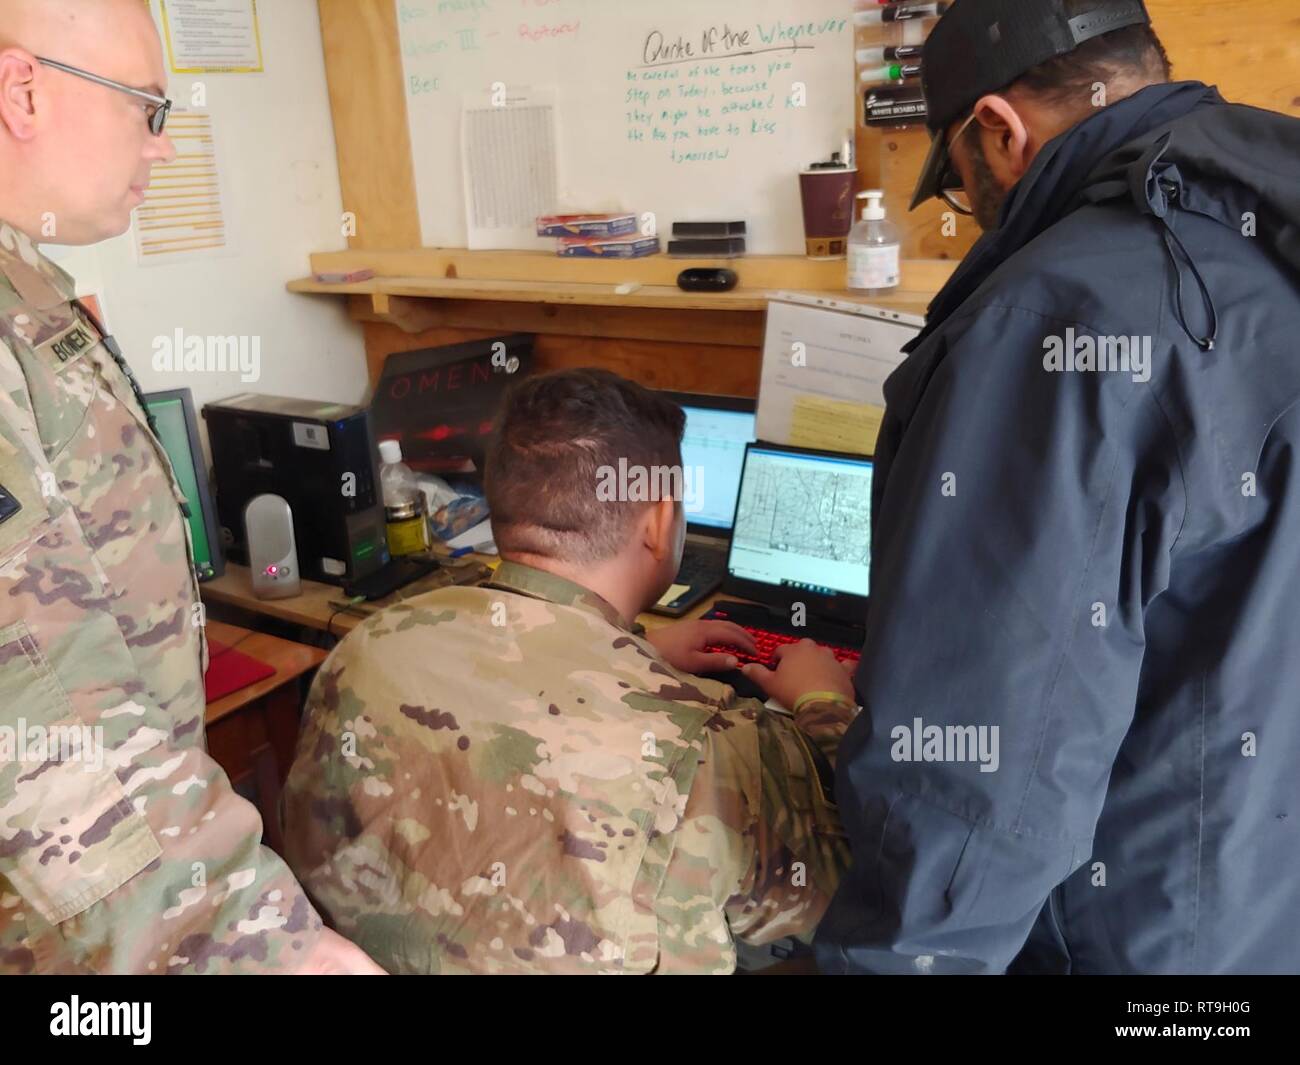 Staff Sgt. Richard Bowen and Pfc. Eric Lopez, 869th Movement Control Team, getting trained on the new Global Distribution Management System (GDMS) at the Baghdad Diplomatic Support Center, Iraq, Jan. 29, 2019. Stock Photo